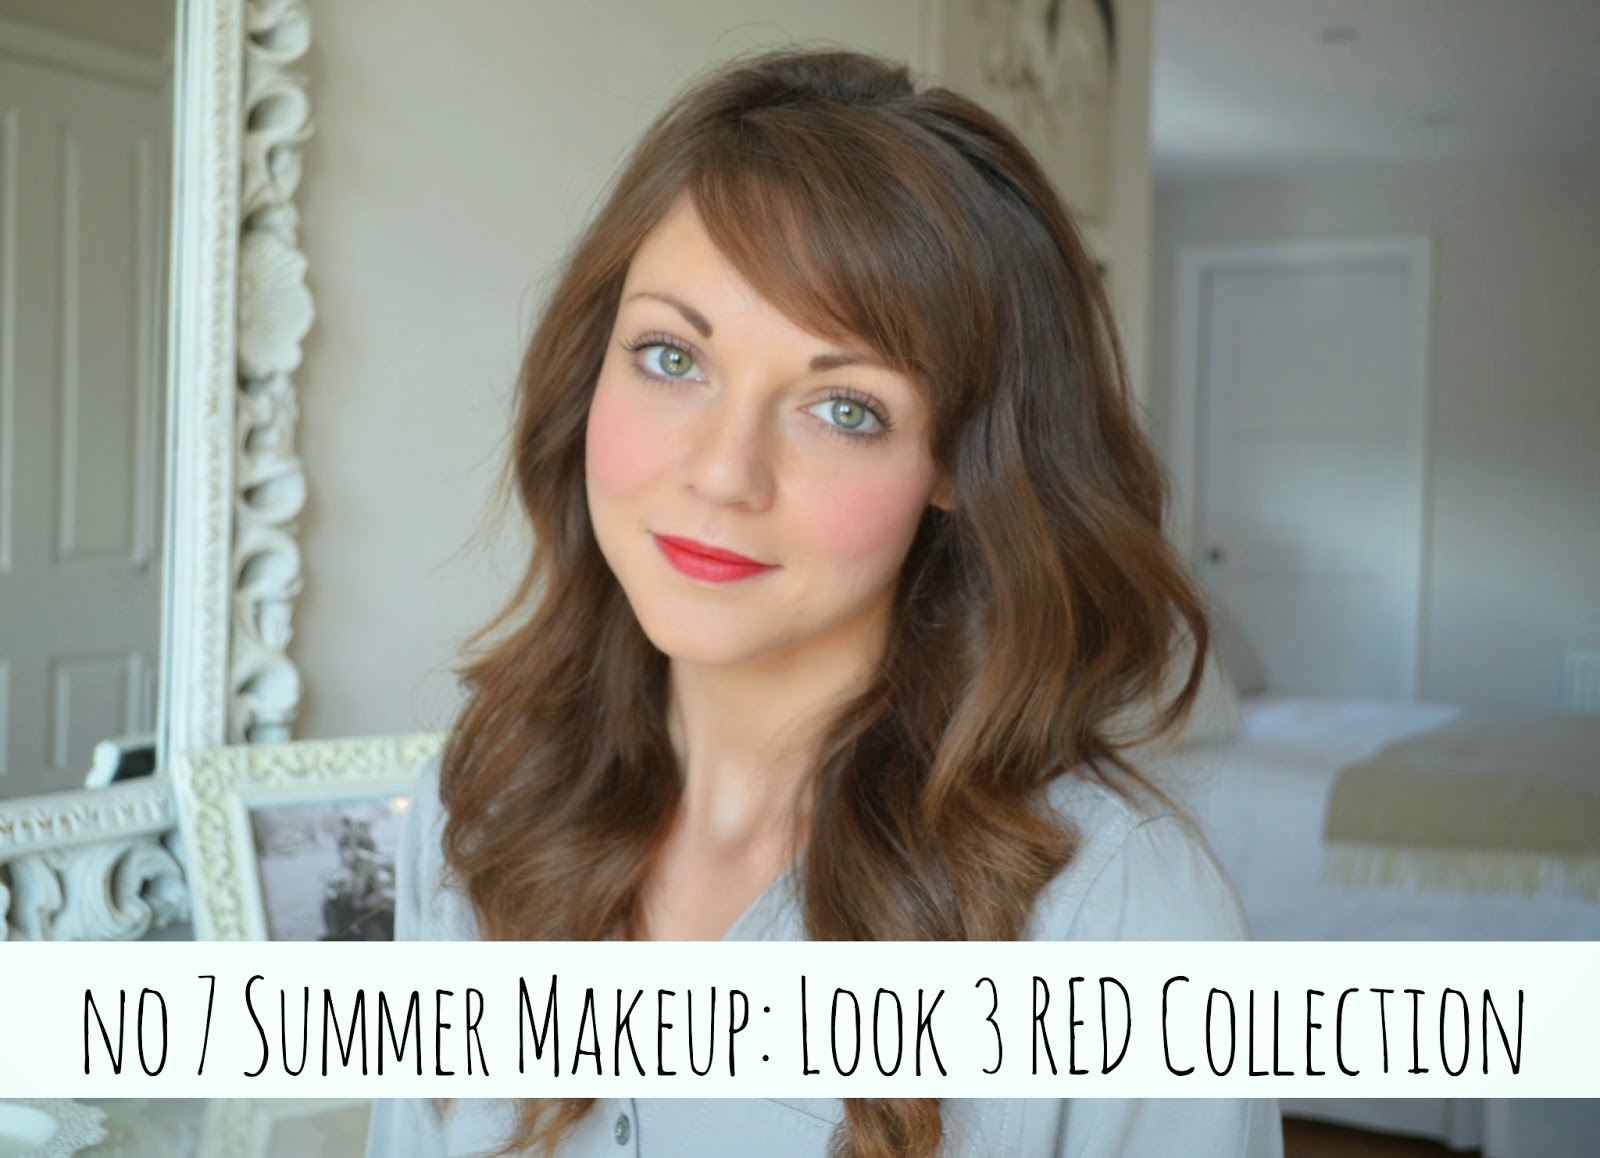 No 7 Summer Makeup: Look 3 The Red Collection